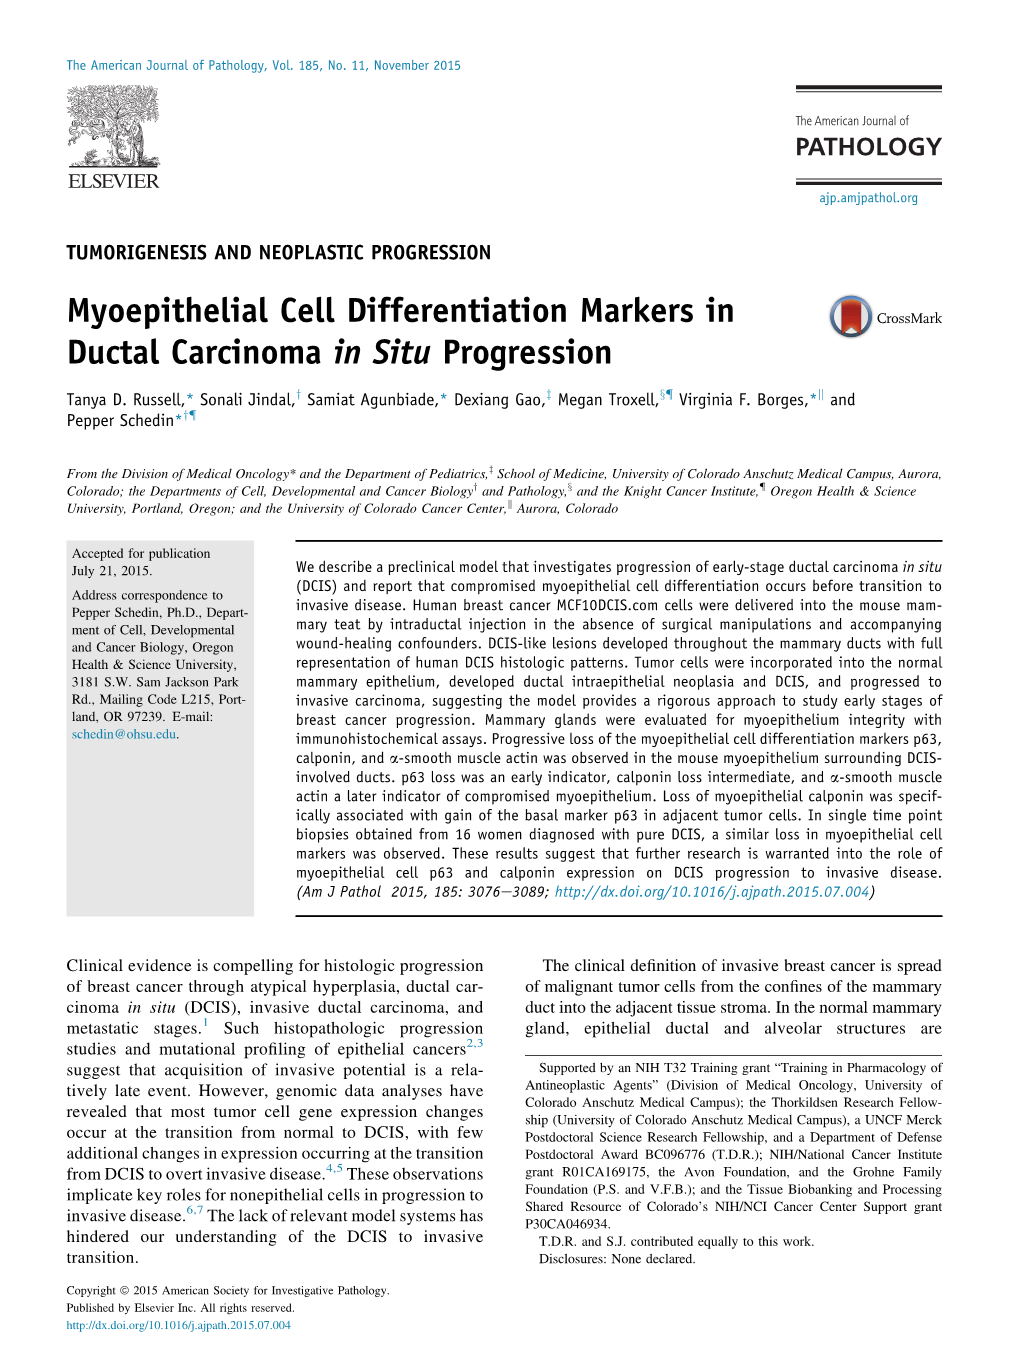 Myoepithelial Cell Differentiation Markers in Ductal Carcinoma in Situ Progression